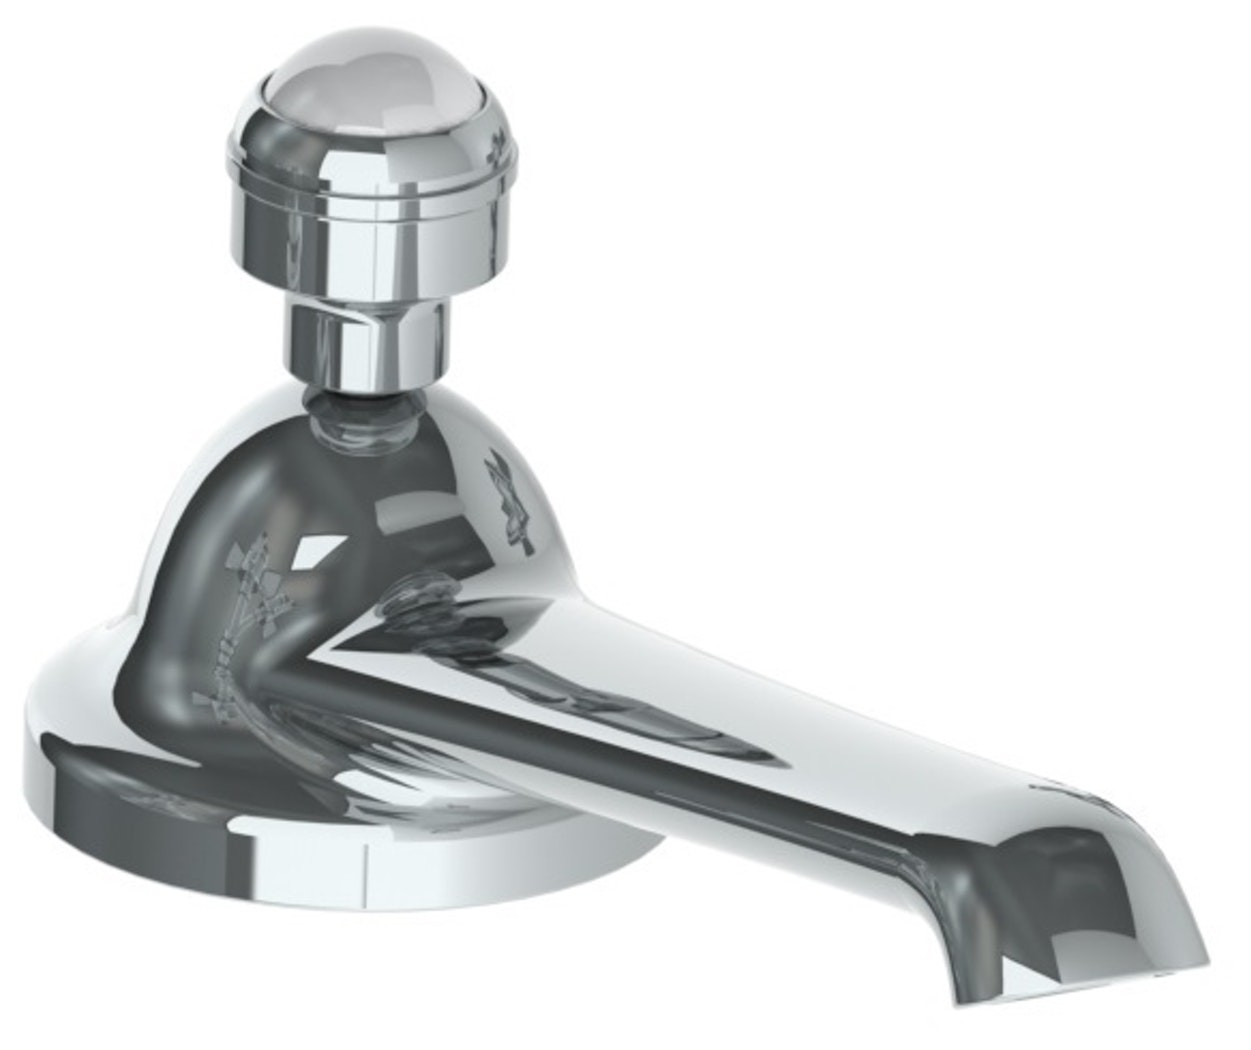 WATERMARK 321-2-AUT STRATFORD 3 INCH SINGLE HOLE DECK MOUNT AUTOMATIC BATHROOM FAUCET WITH SENSOR